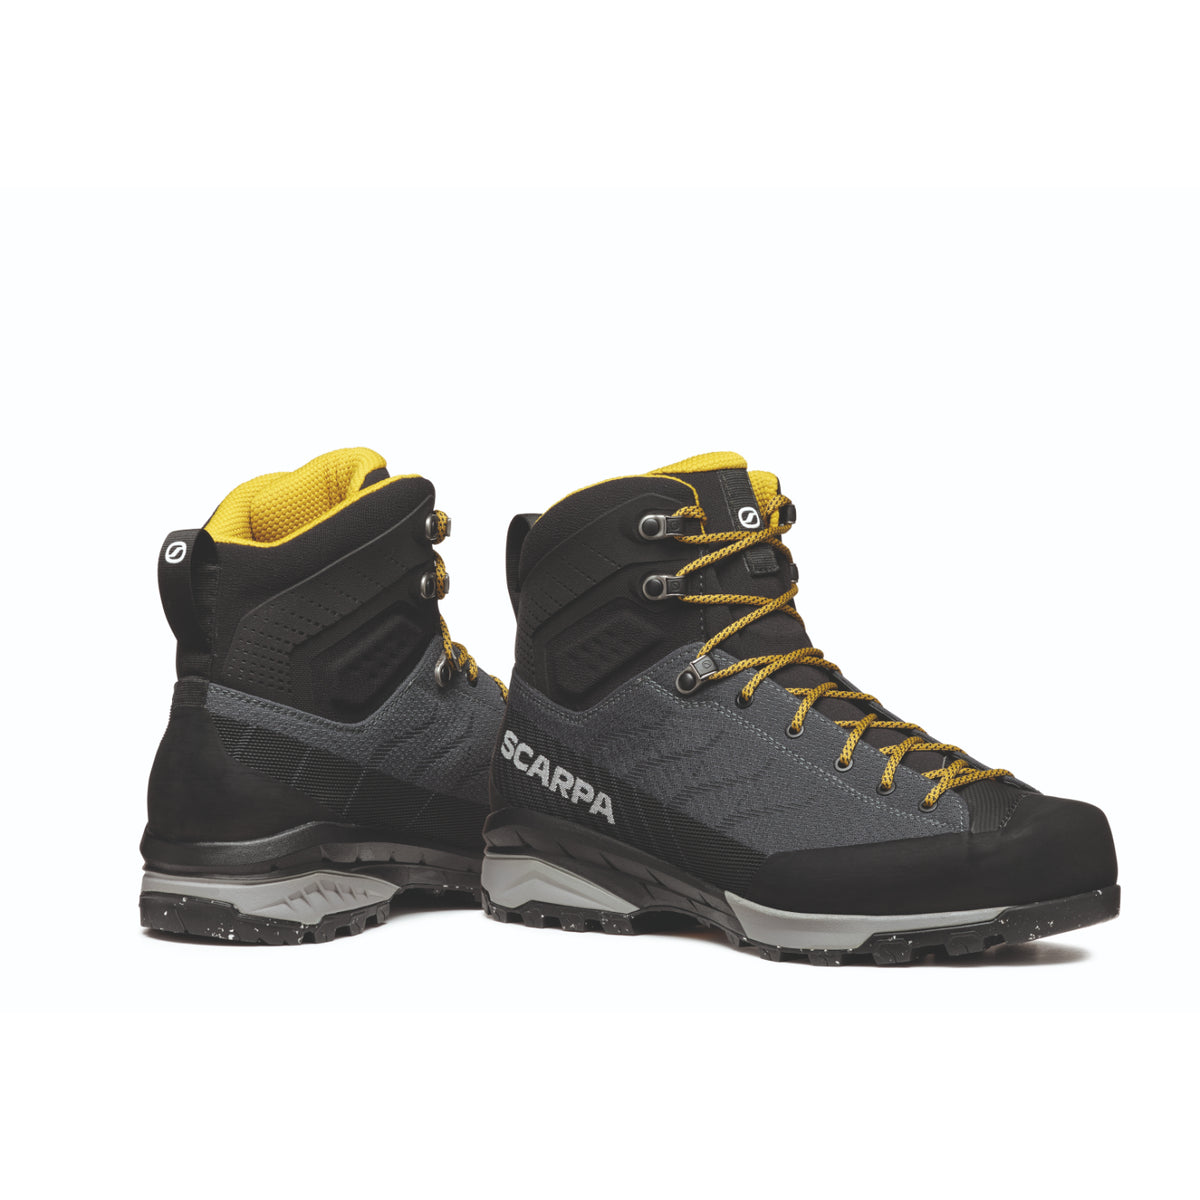 Scarpa Mescalito TRK Planet GTX in grey/curry. side view showing logo